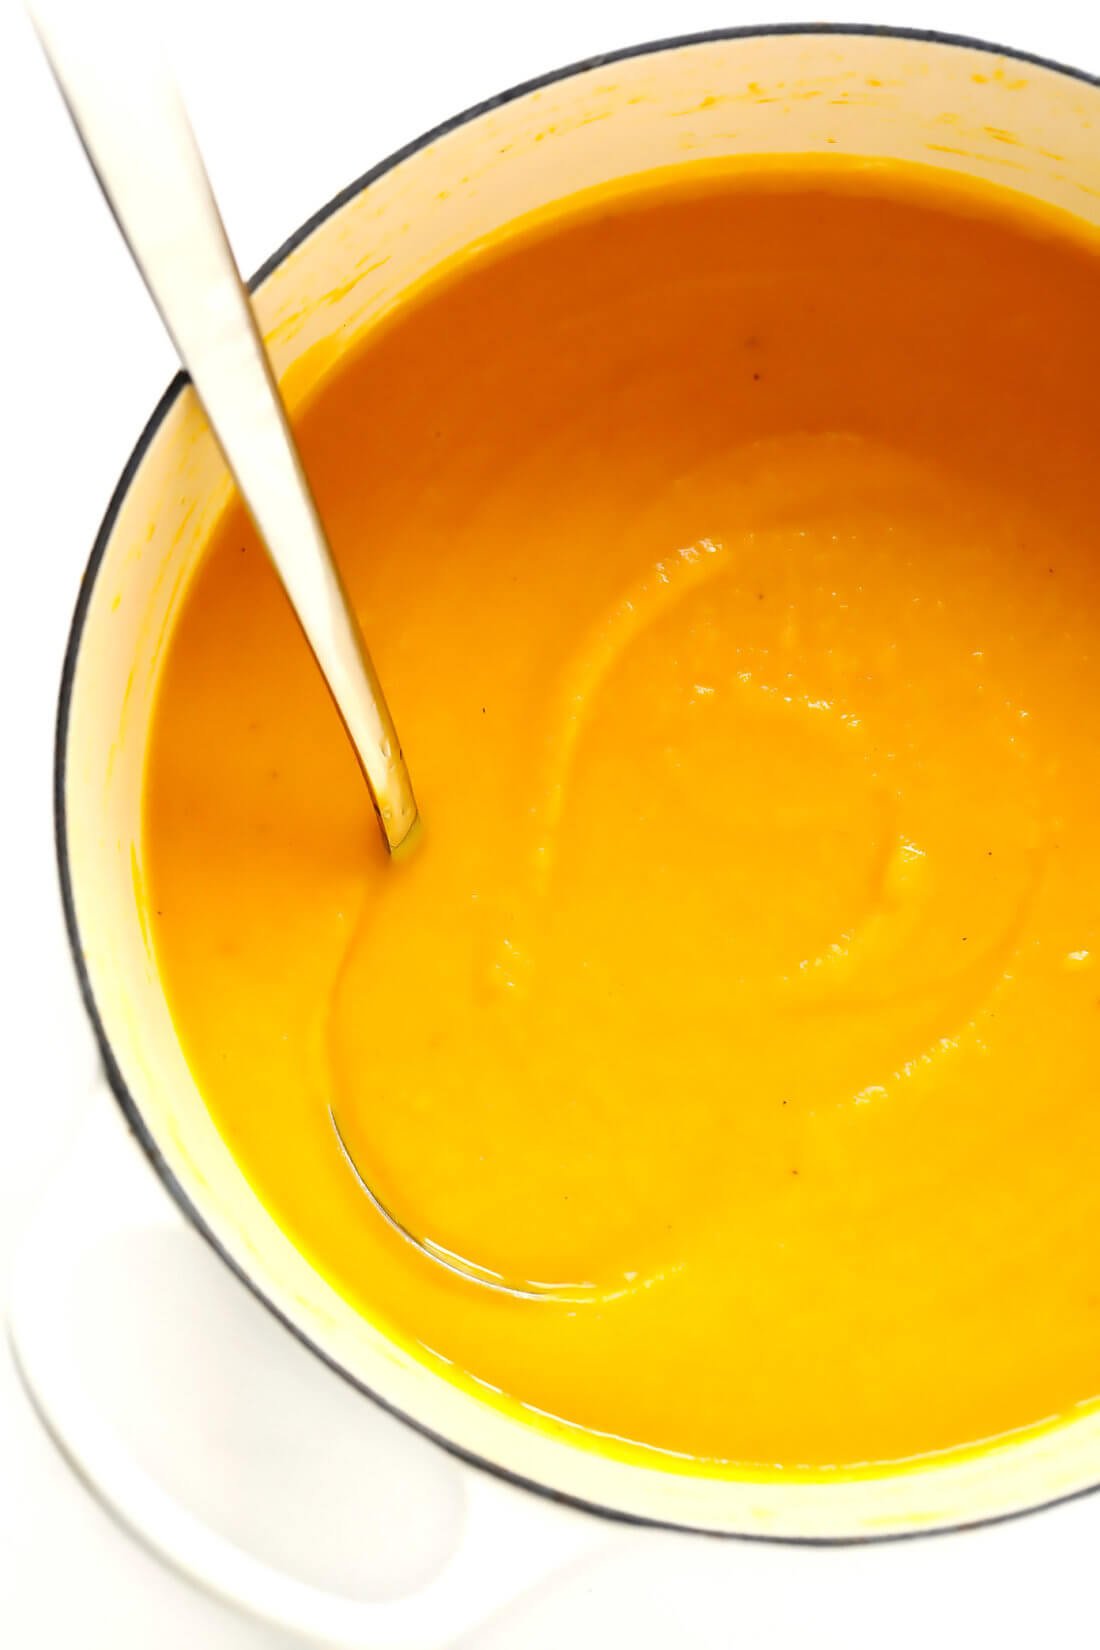 The Best Butternut Squash Soup Recipe | Slow Cooker, Instant Pot or Stovetop